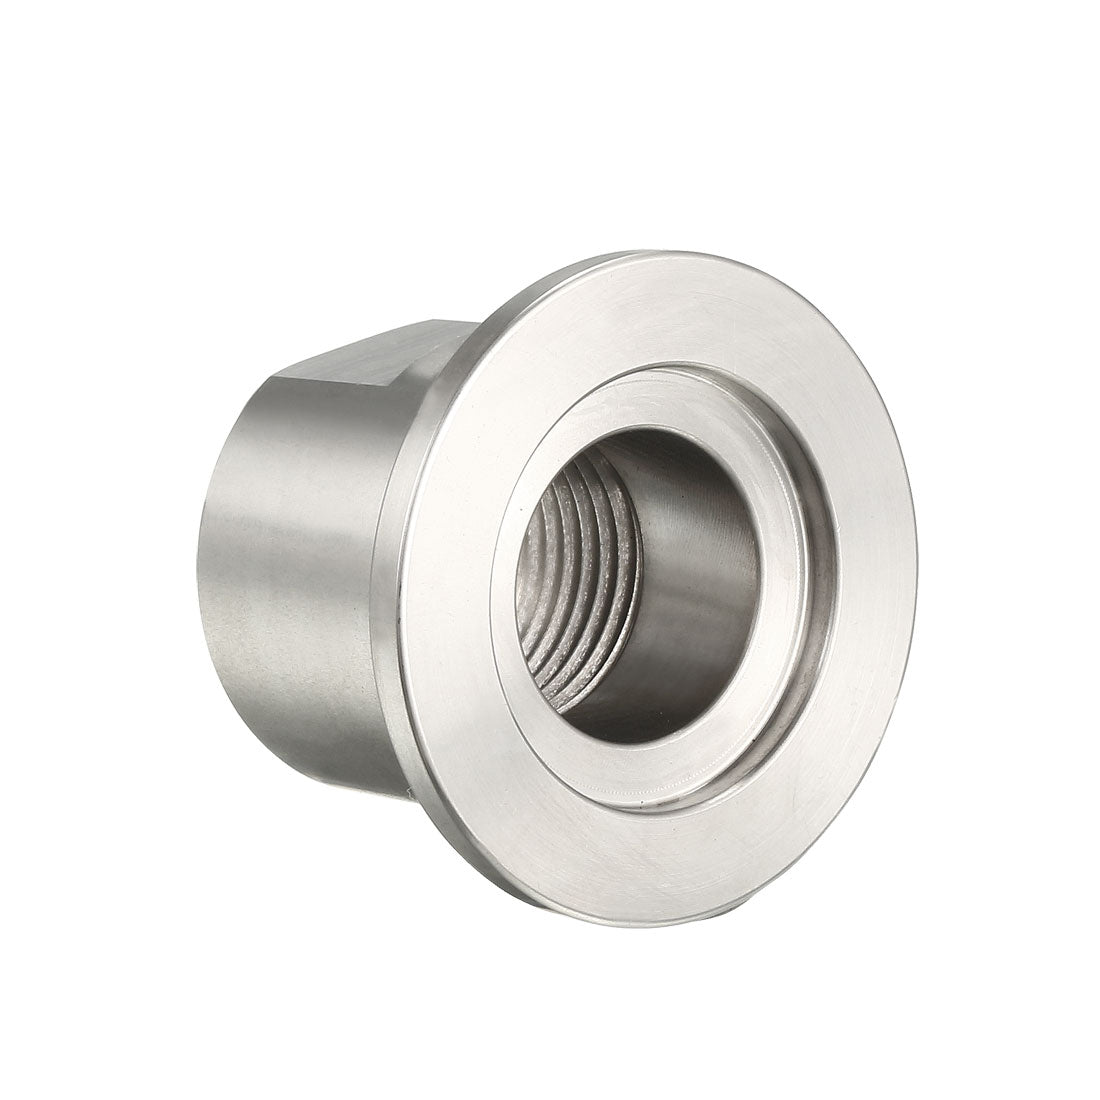 uxcell Uxcell Pipe Fitting KF25 Female Threaded 1/2 PT to Clamp OD 40mm Ferrule